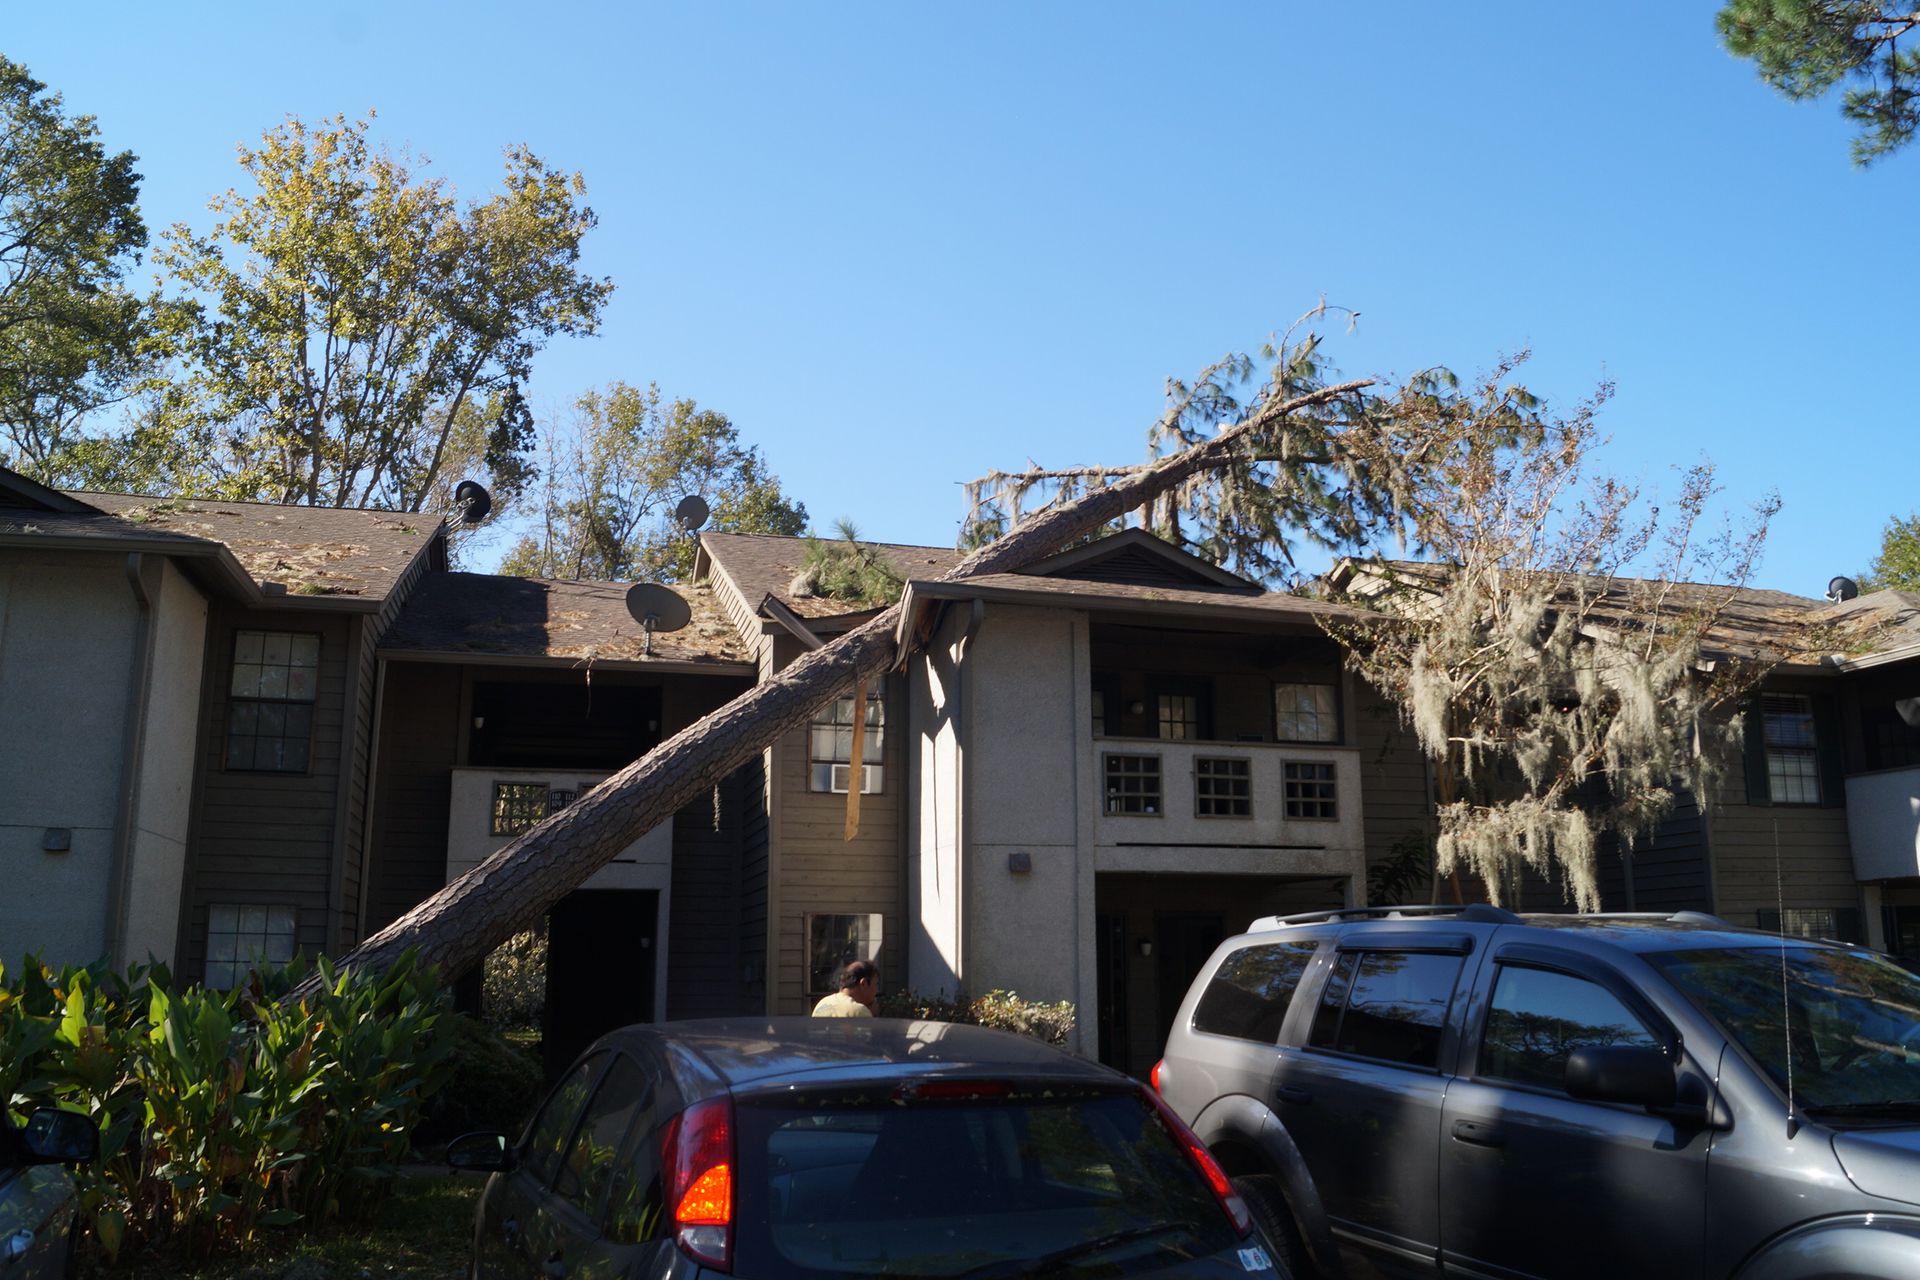 House Roof Wrecked by Storm